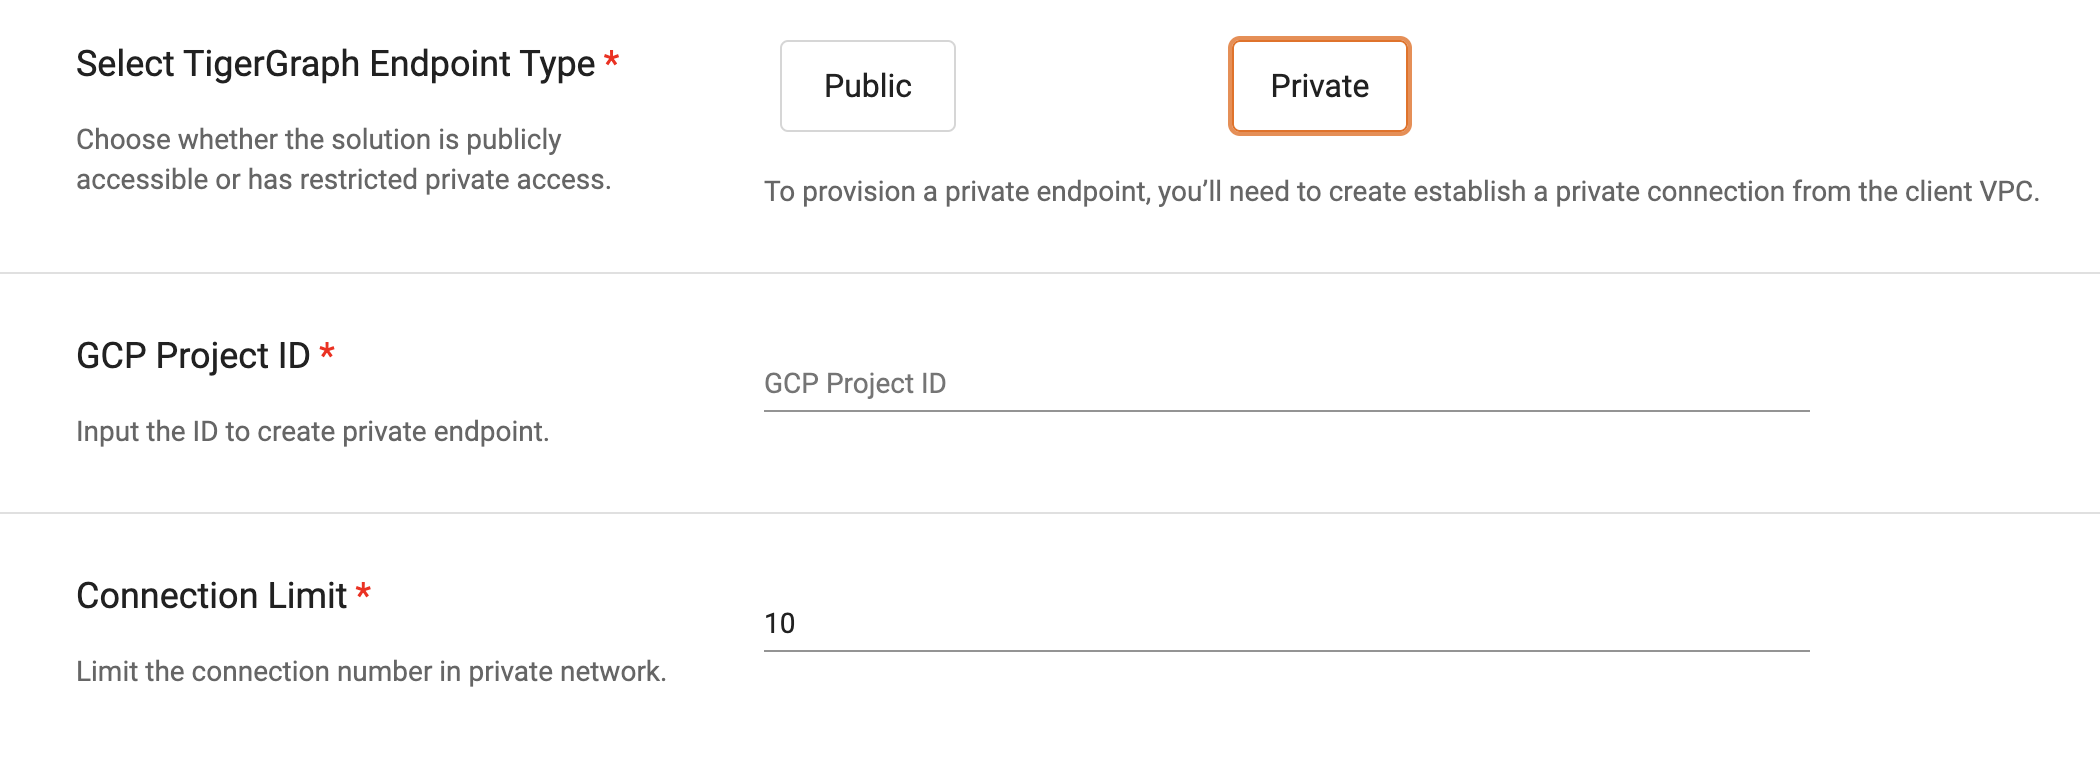 enable private access gcp